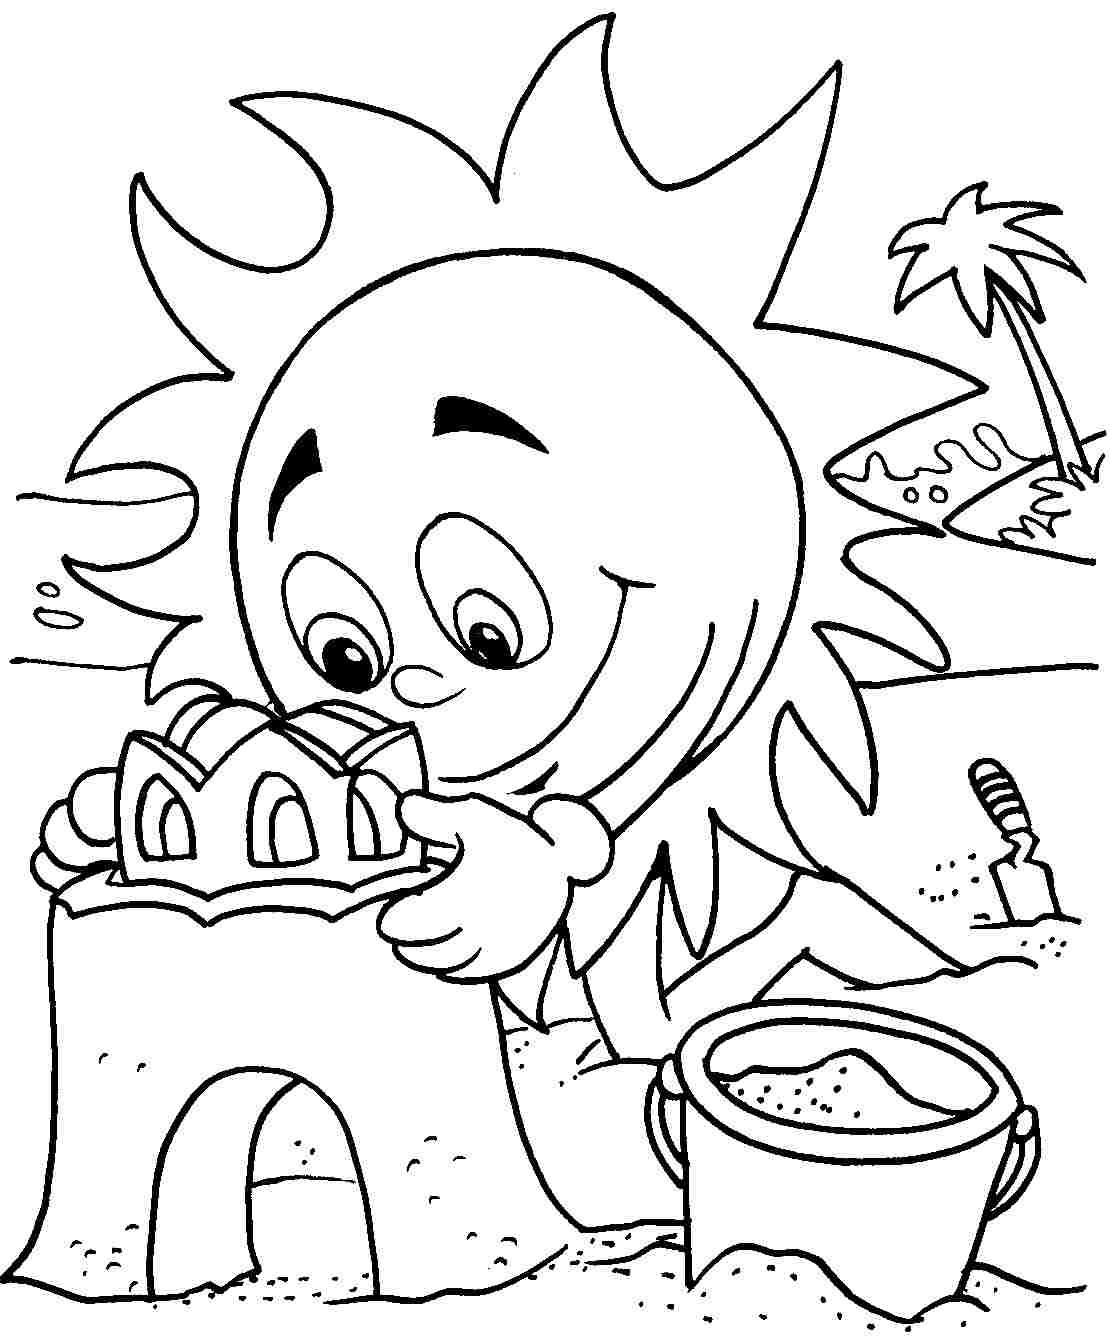 Coloring Pages For Kids Summer
 Summer Drawing For Kids at GetDrawings